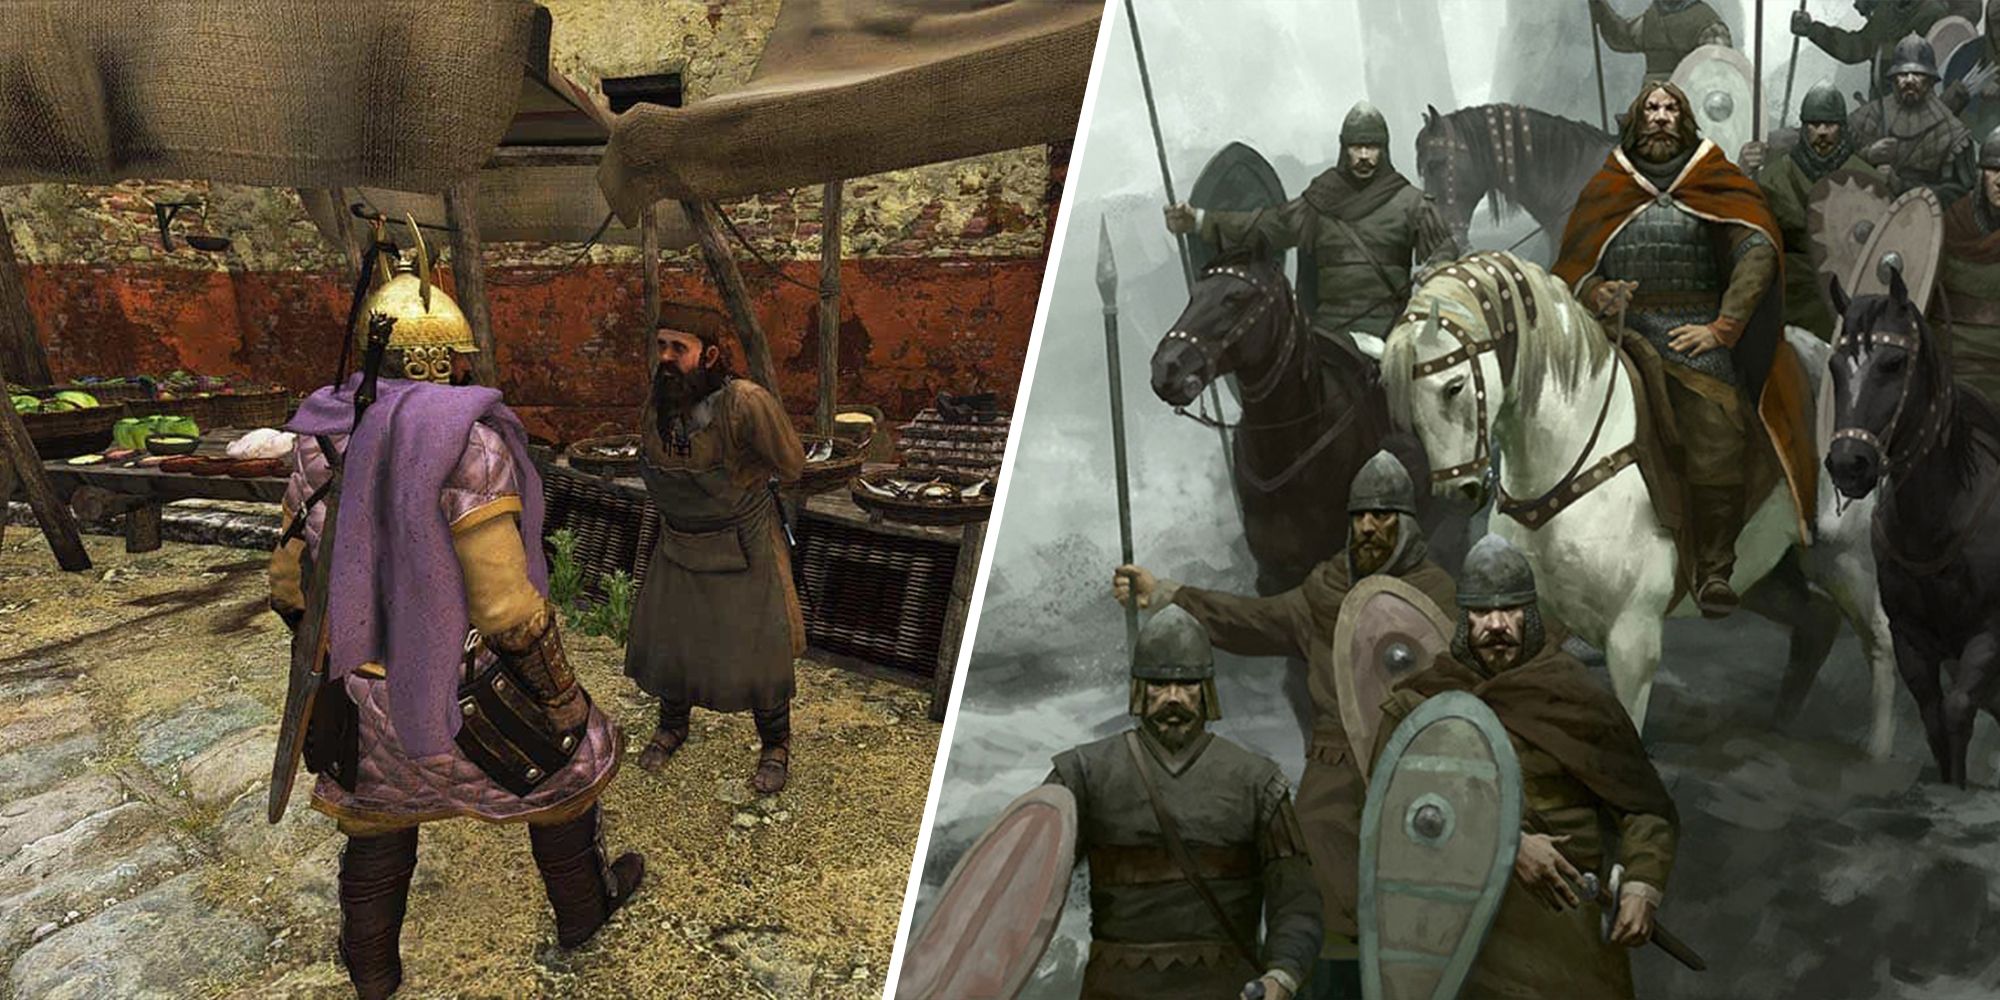 Split image of a merchant's stand and a small party travelling in snow.